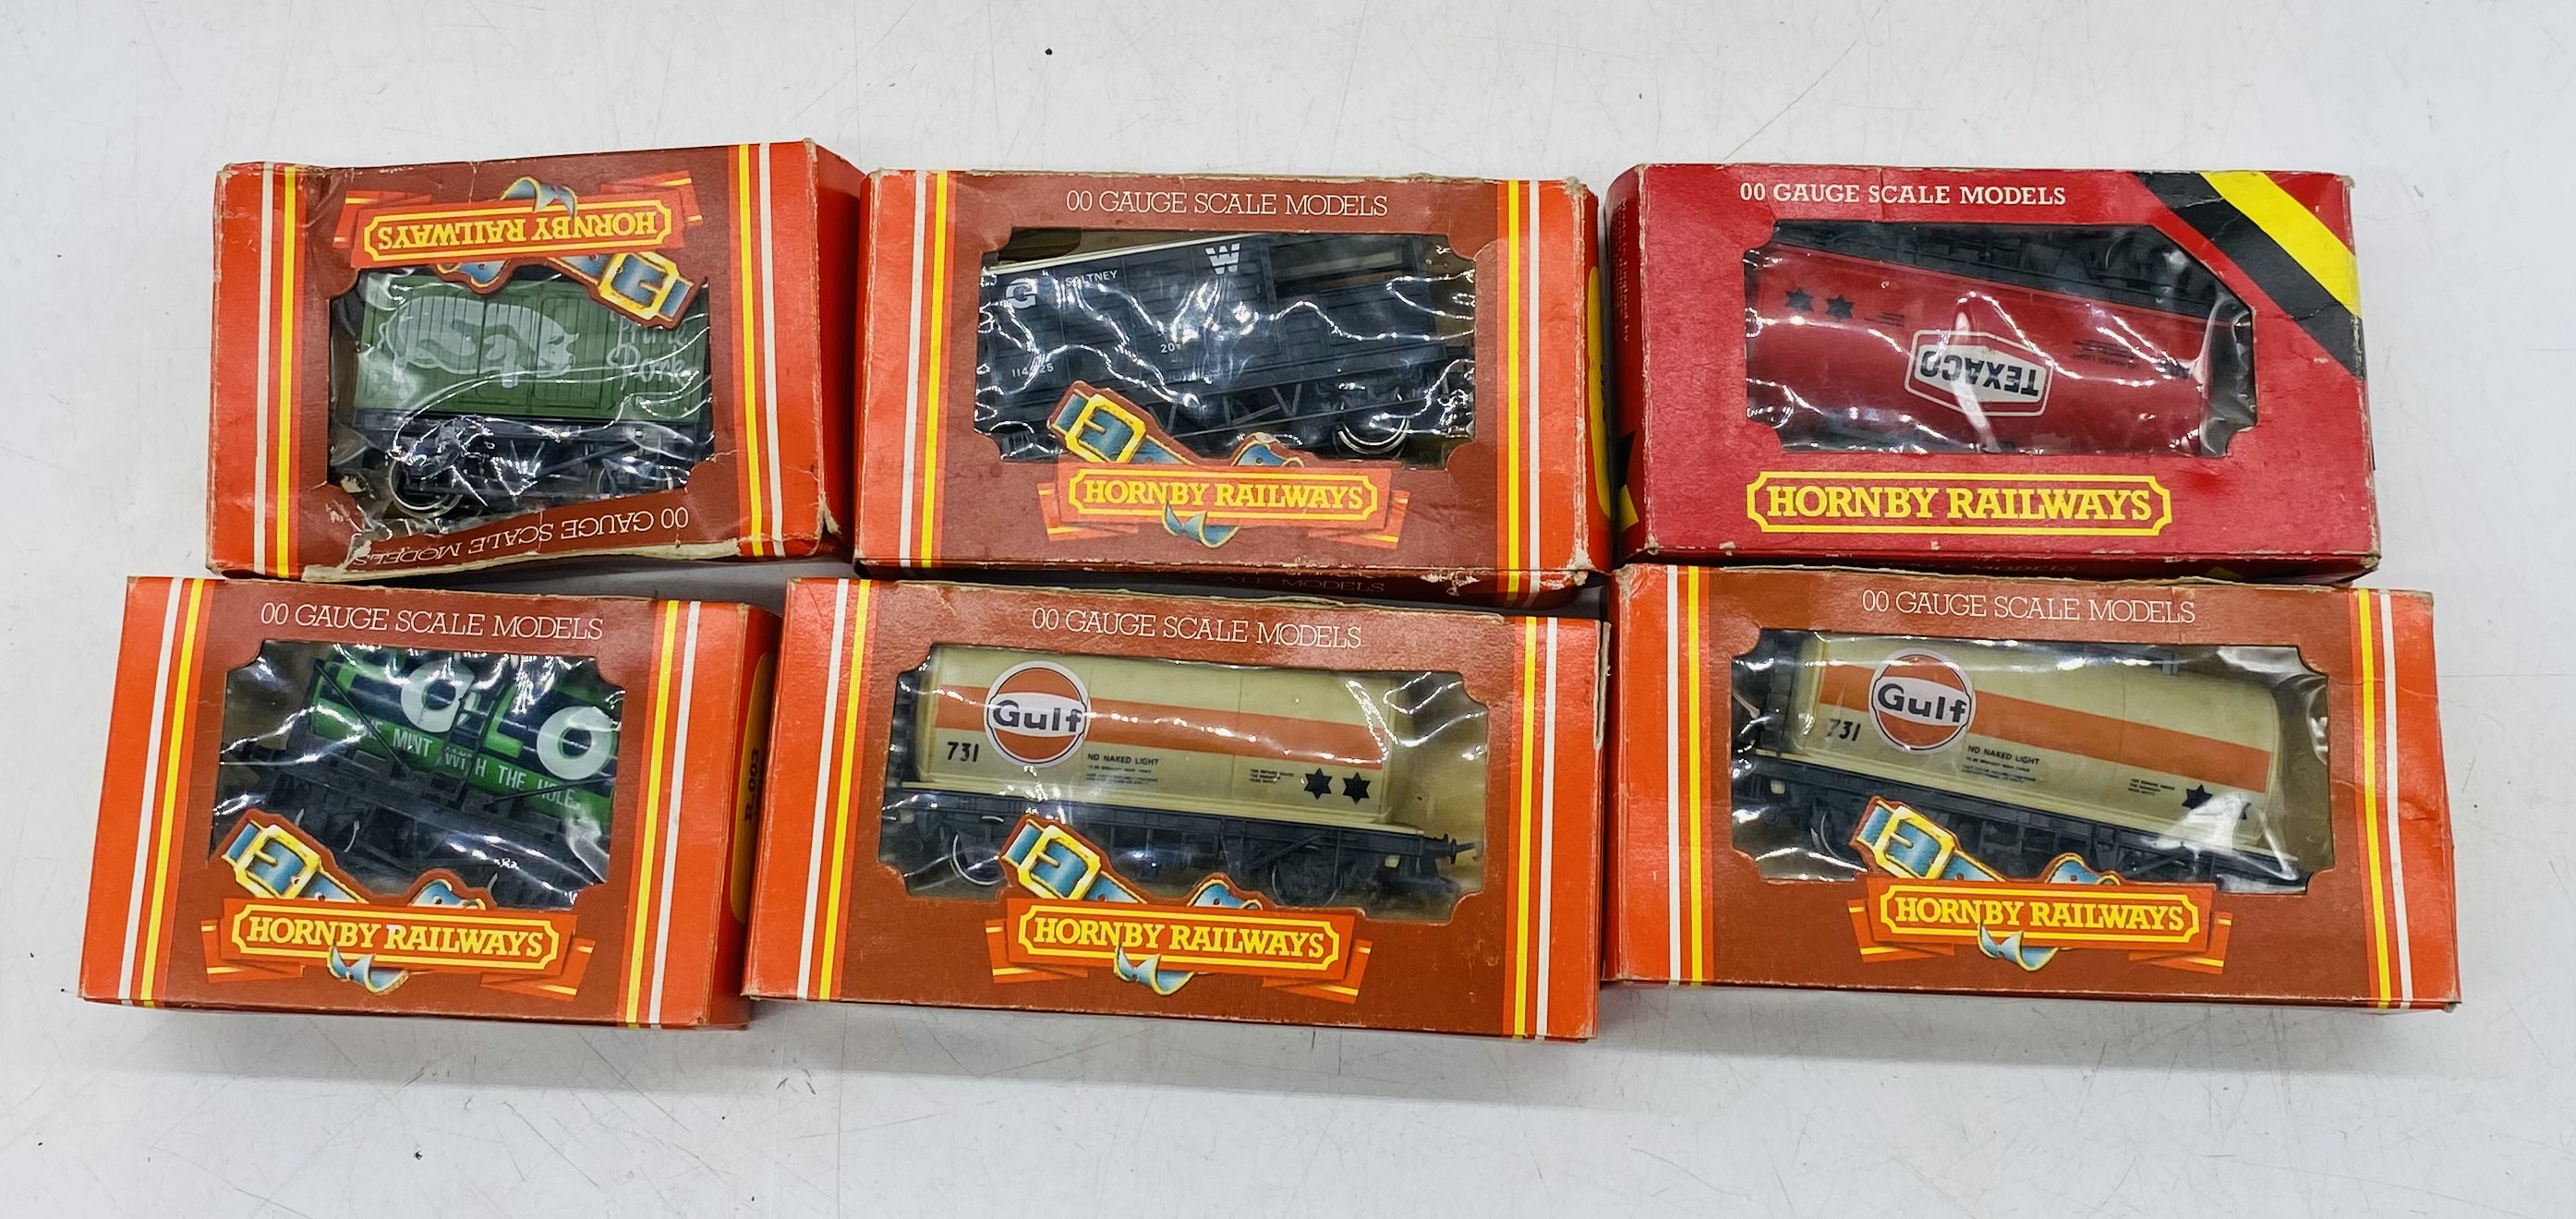 A collection of model railway OO gauge rolling stock, carriages, track and single locomotive. - Image 3 of 7